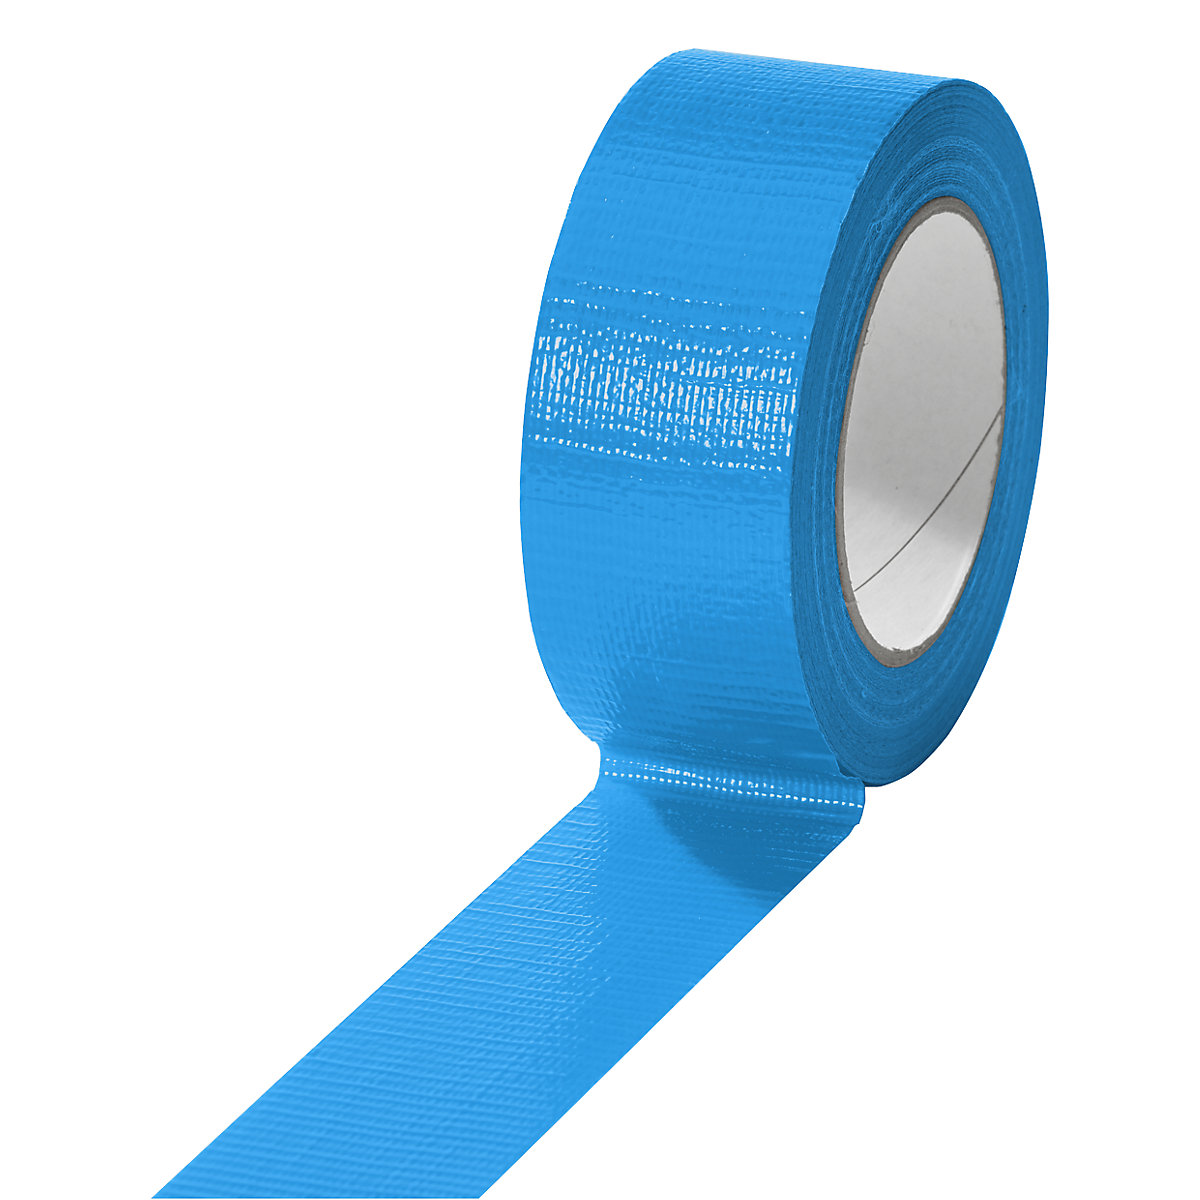 Fabric tape, in different colours, pack of 24 rolls, blue, tape width 38 mm-6